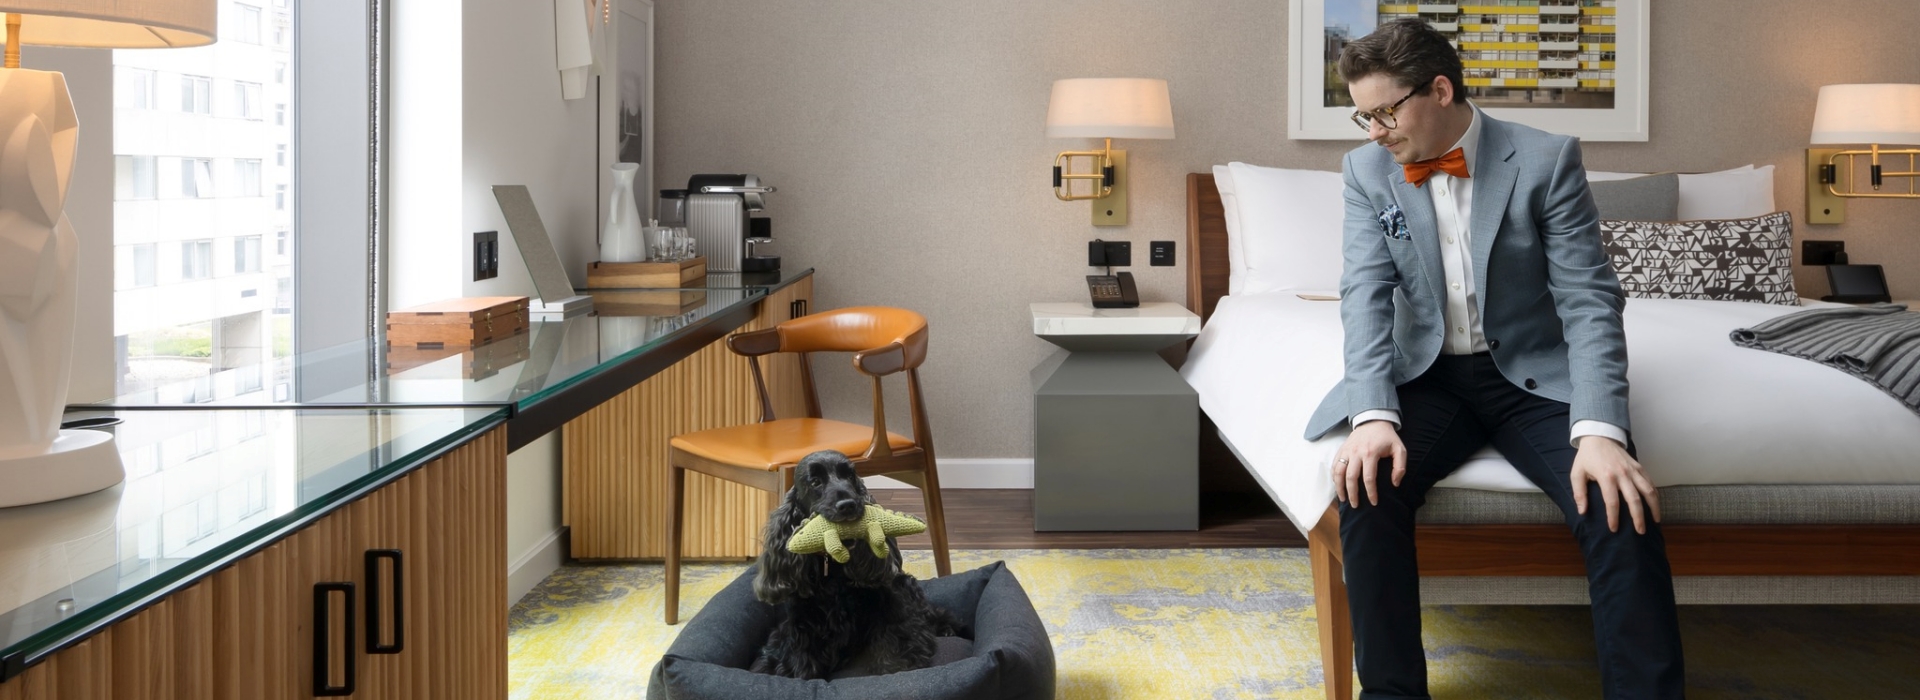 Bankside Hotel: Picture a perfect escape to London